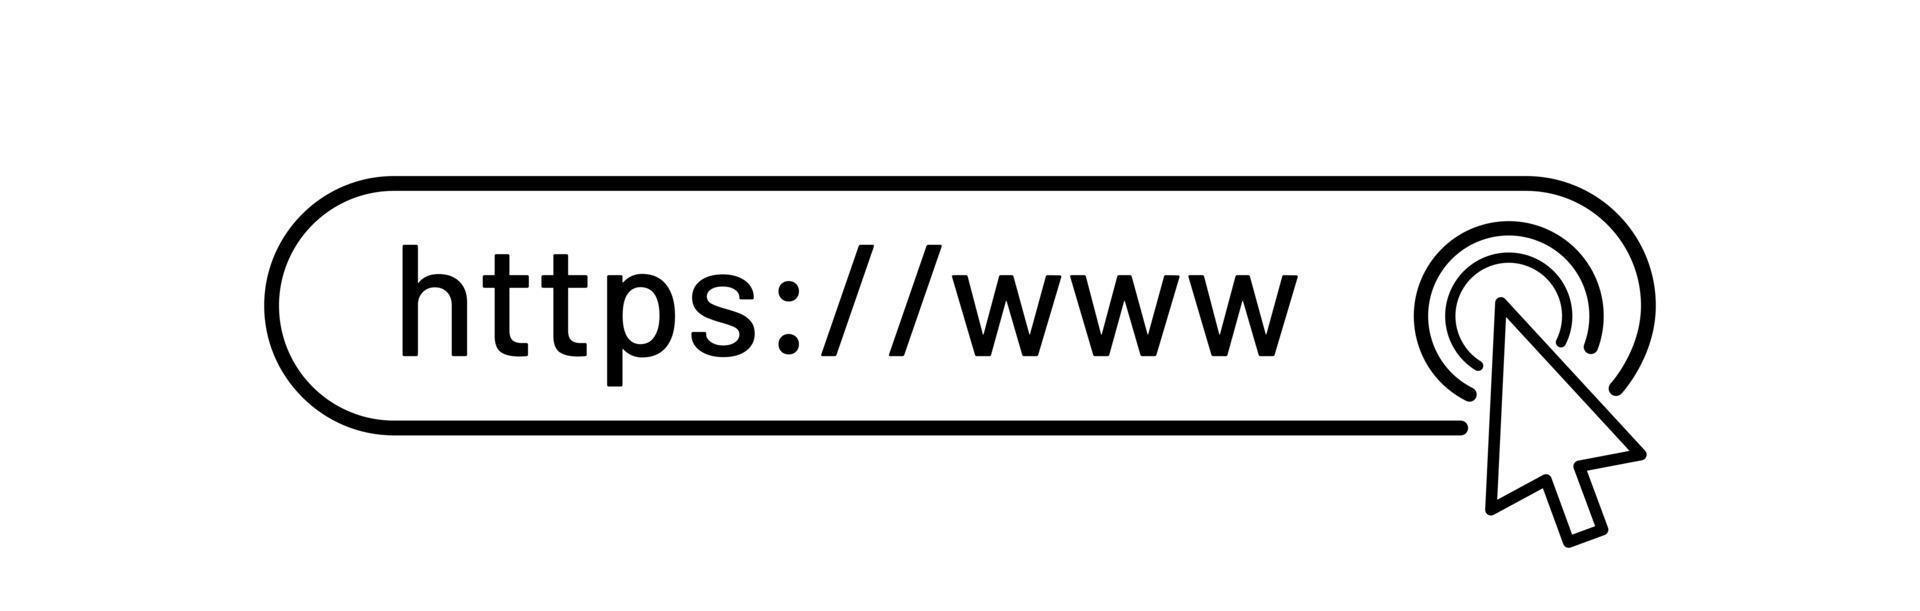 Browser Address Bar with HTTPS Protocol Sign. Search Form Templates for Mobile and Websites. vector